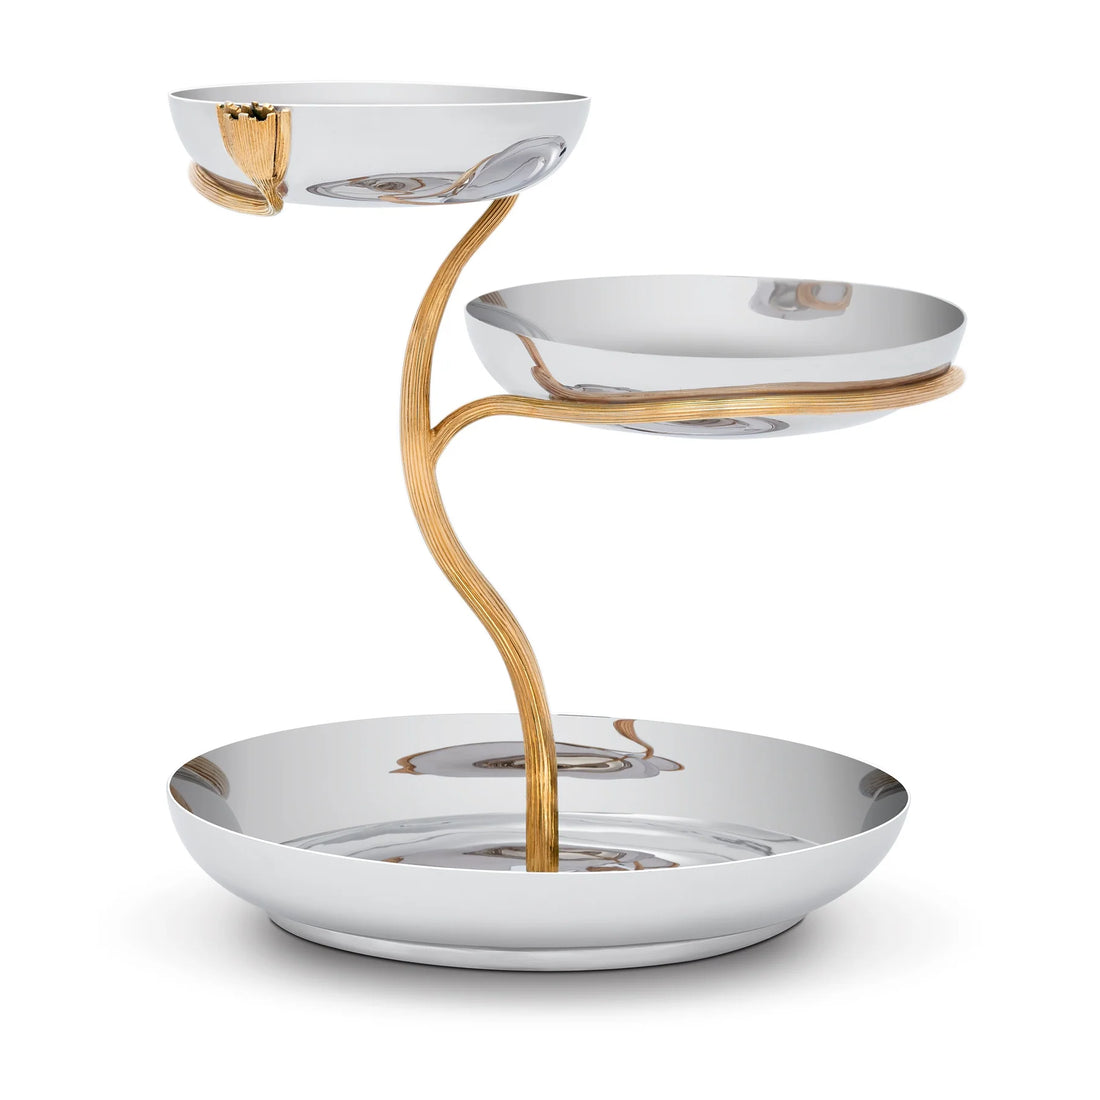 Deco Leaves Stainsless 3 Tier Server-Large